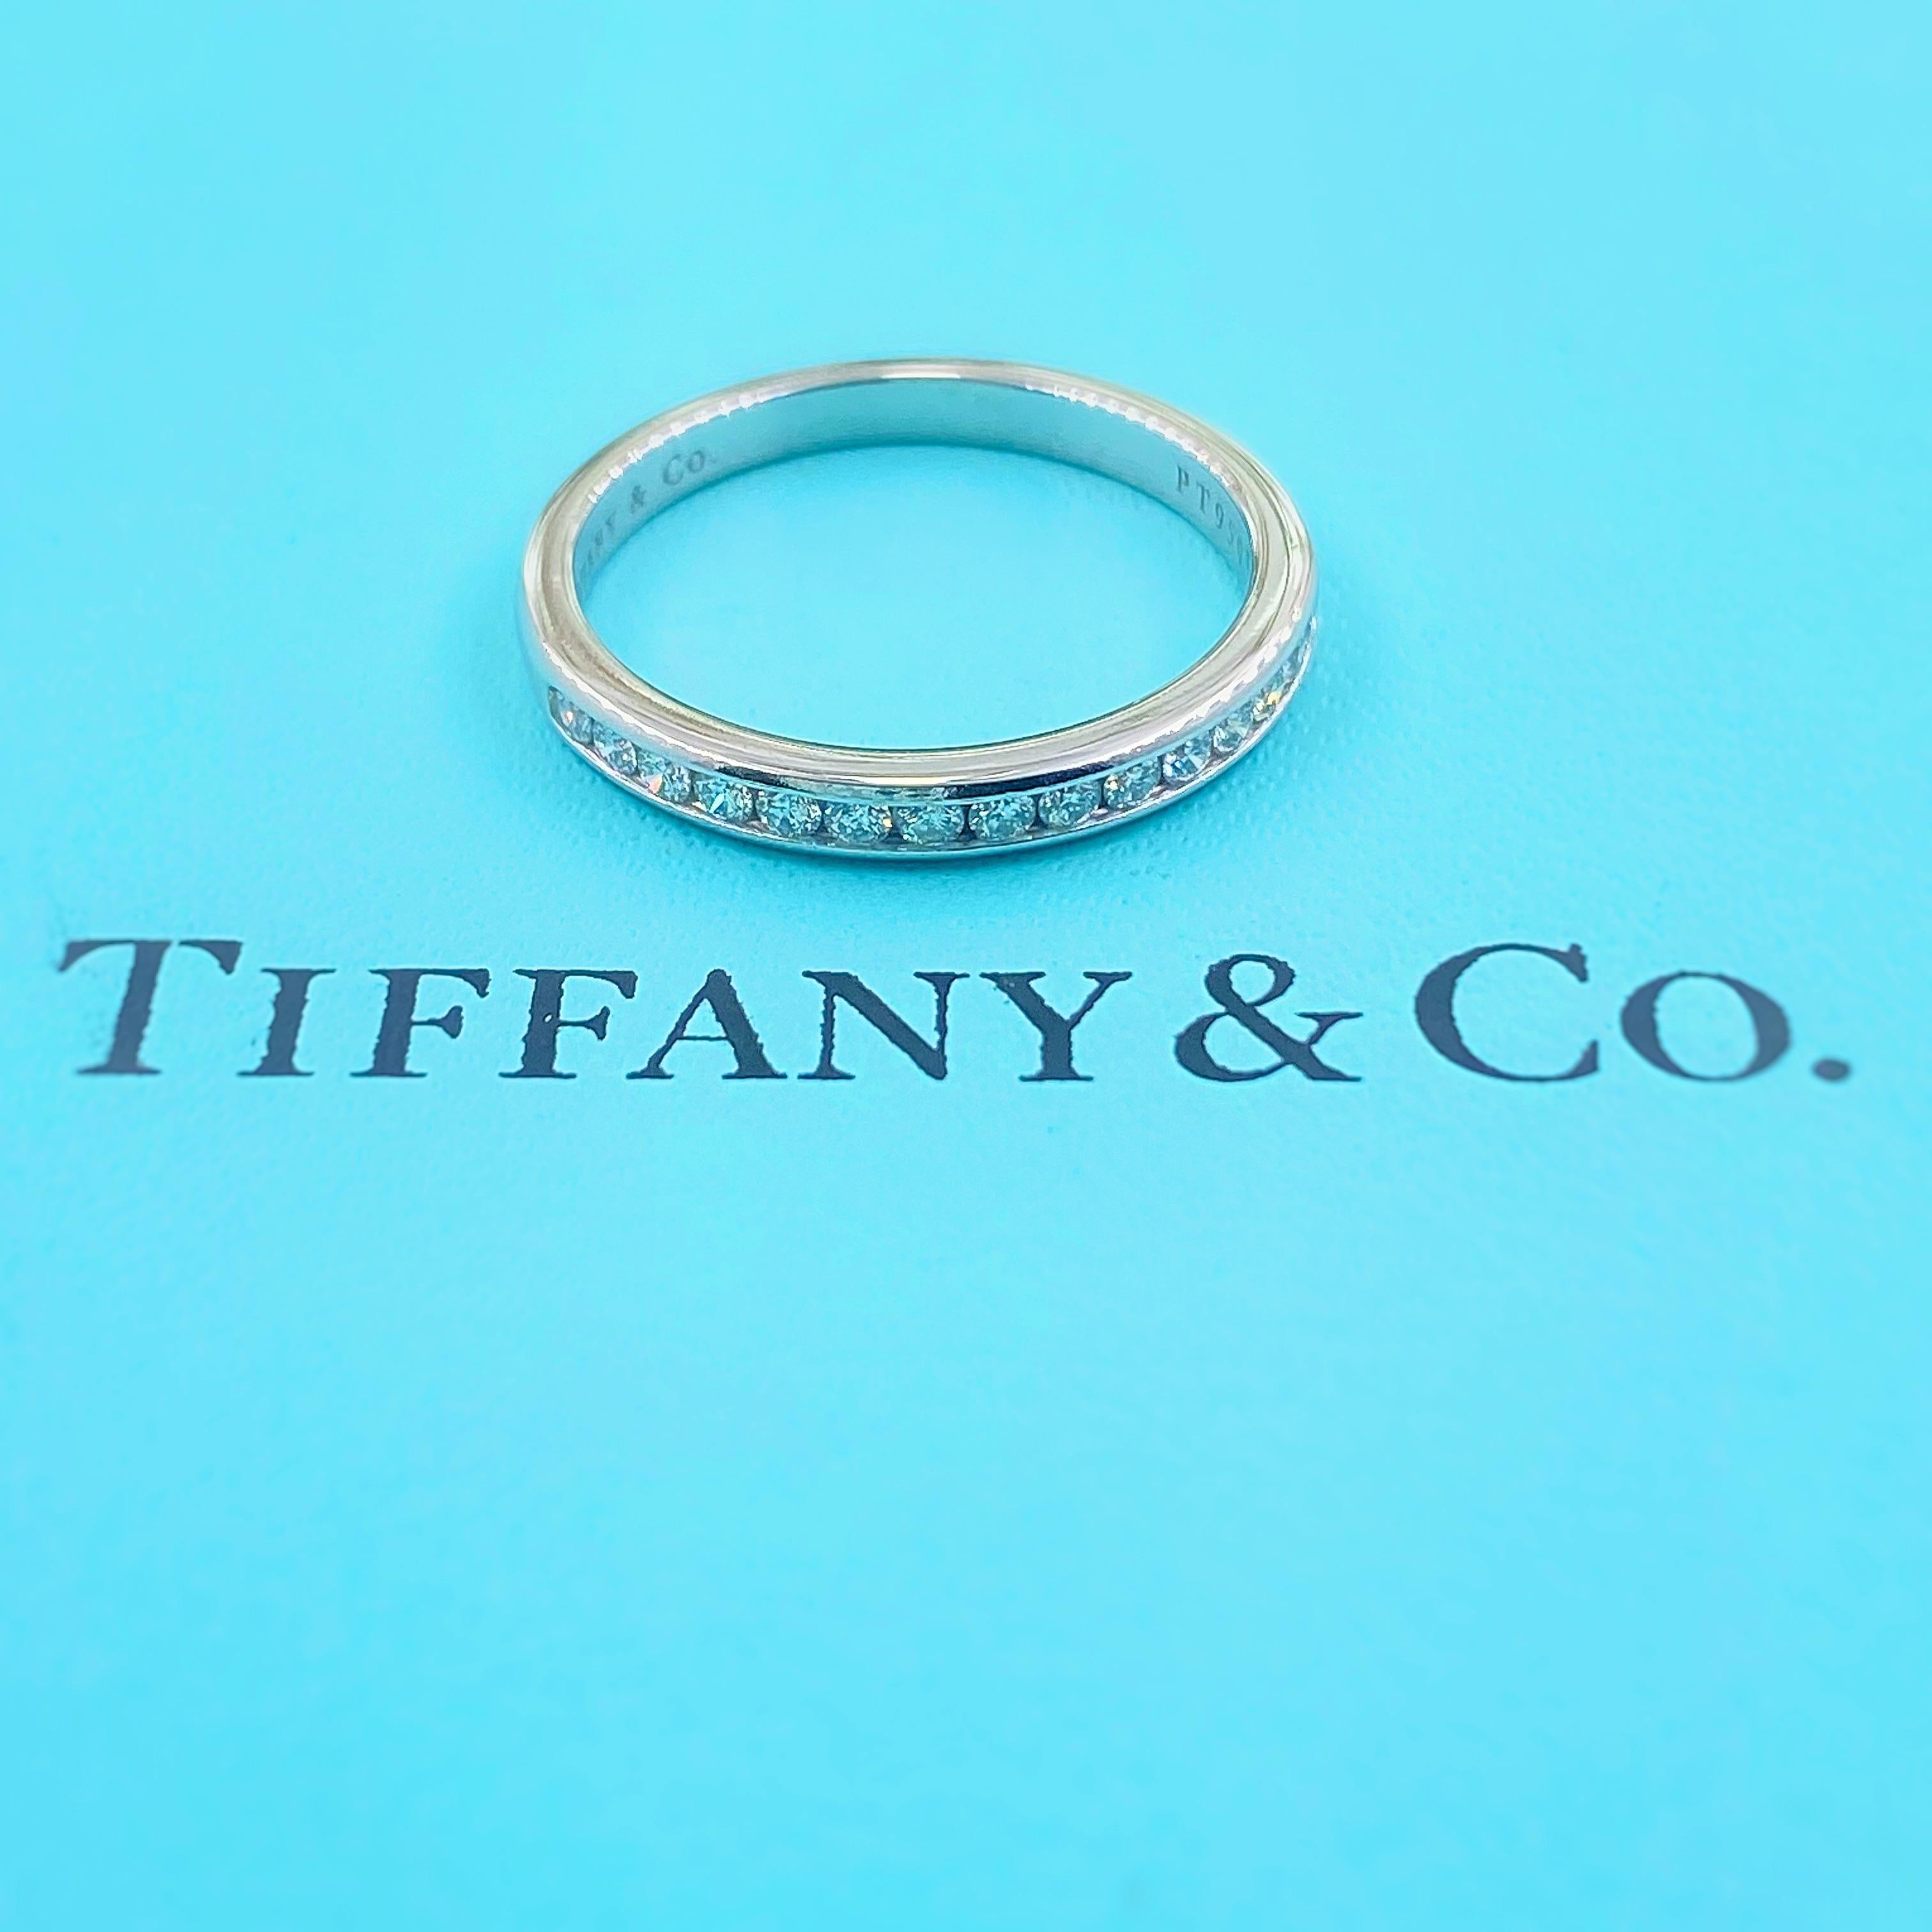 Tiffany & Co. Channel Set Round Diamond Wedding Band 0.24 Carat Platinum In Excellent Condition For Sale In San Diego, CA